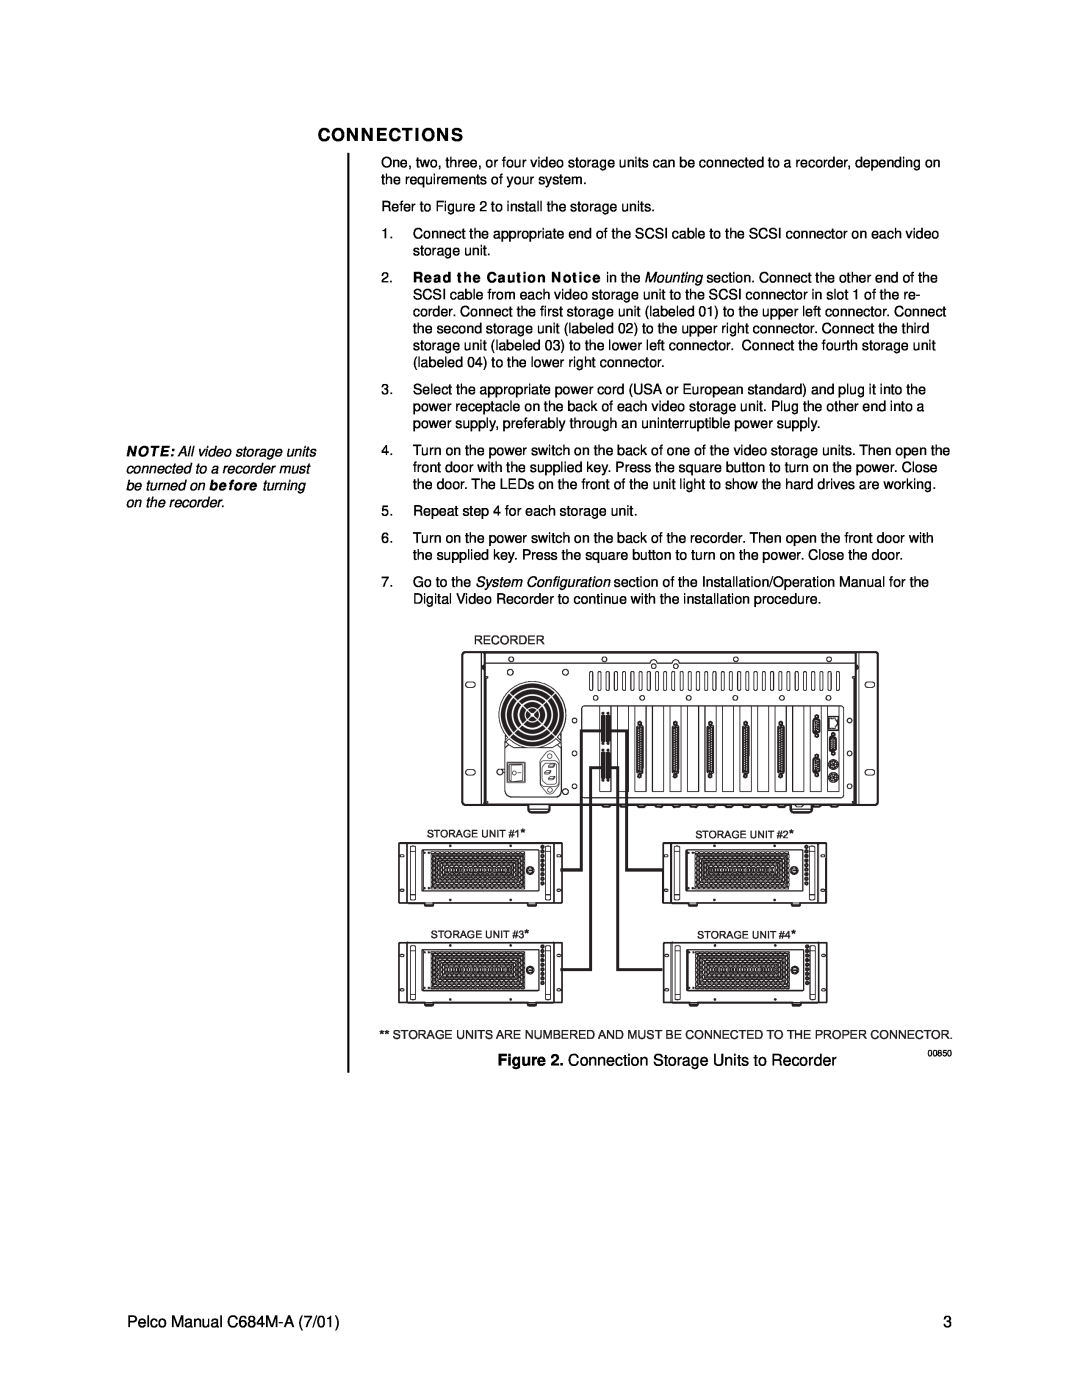 Pelco c684M-A operation manual Connections, Connection Storage Units to Recorder, Pelco Manual C684M-A7/01 